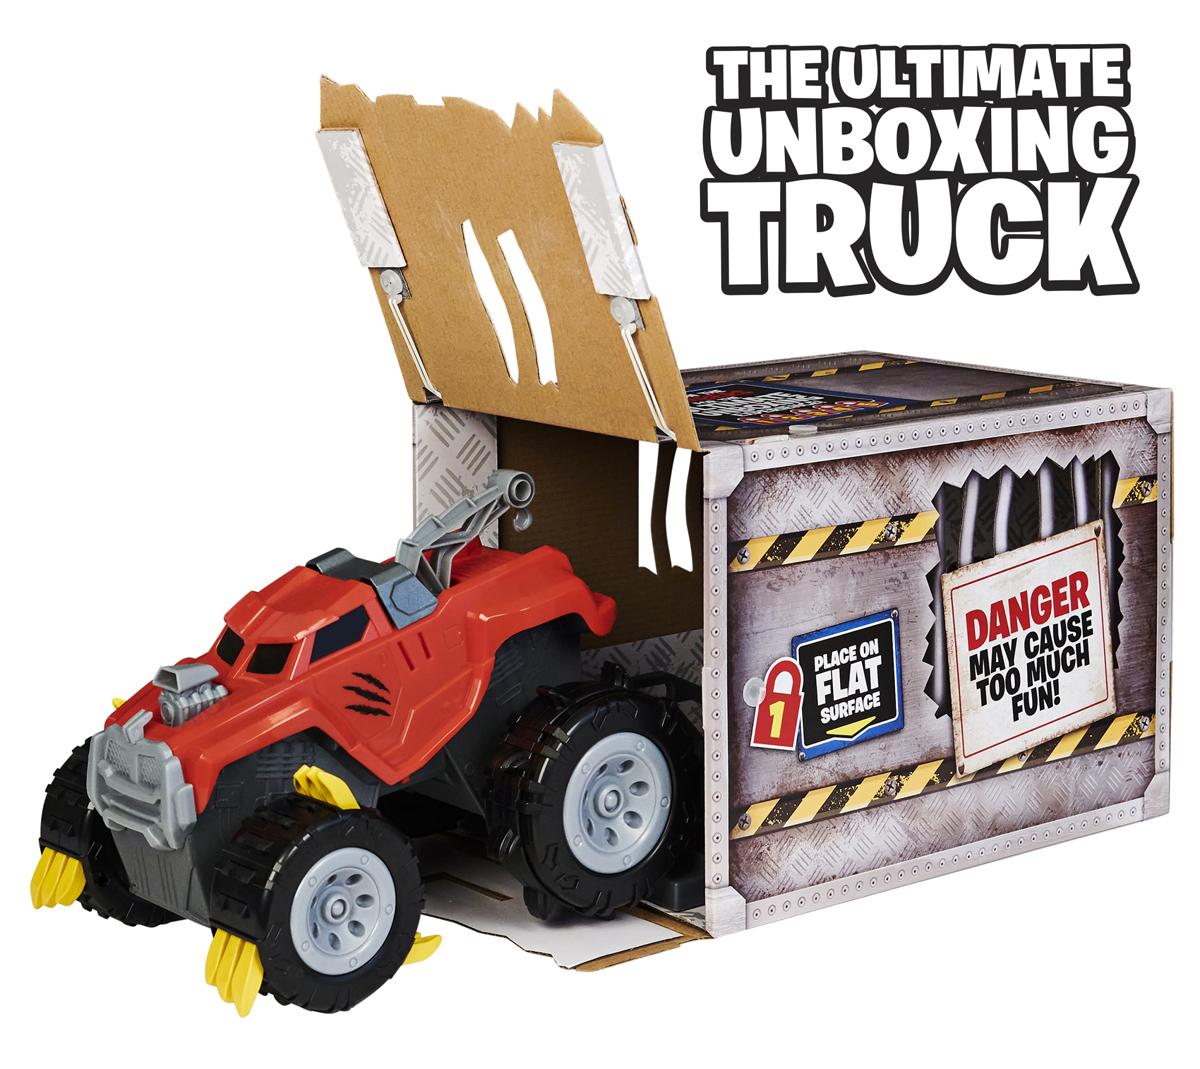 The Animal Interactive Unboxing Toy Truck for 9